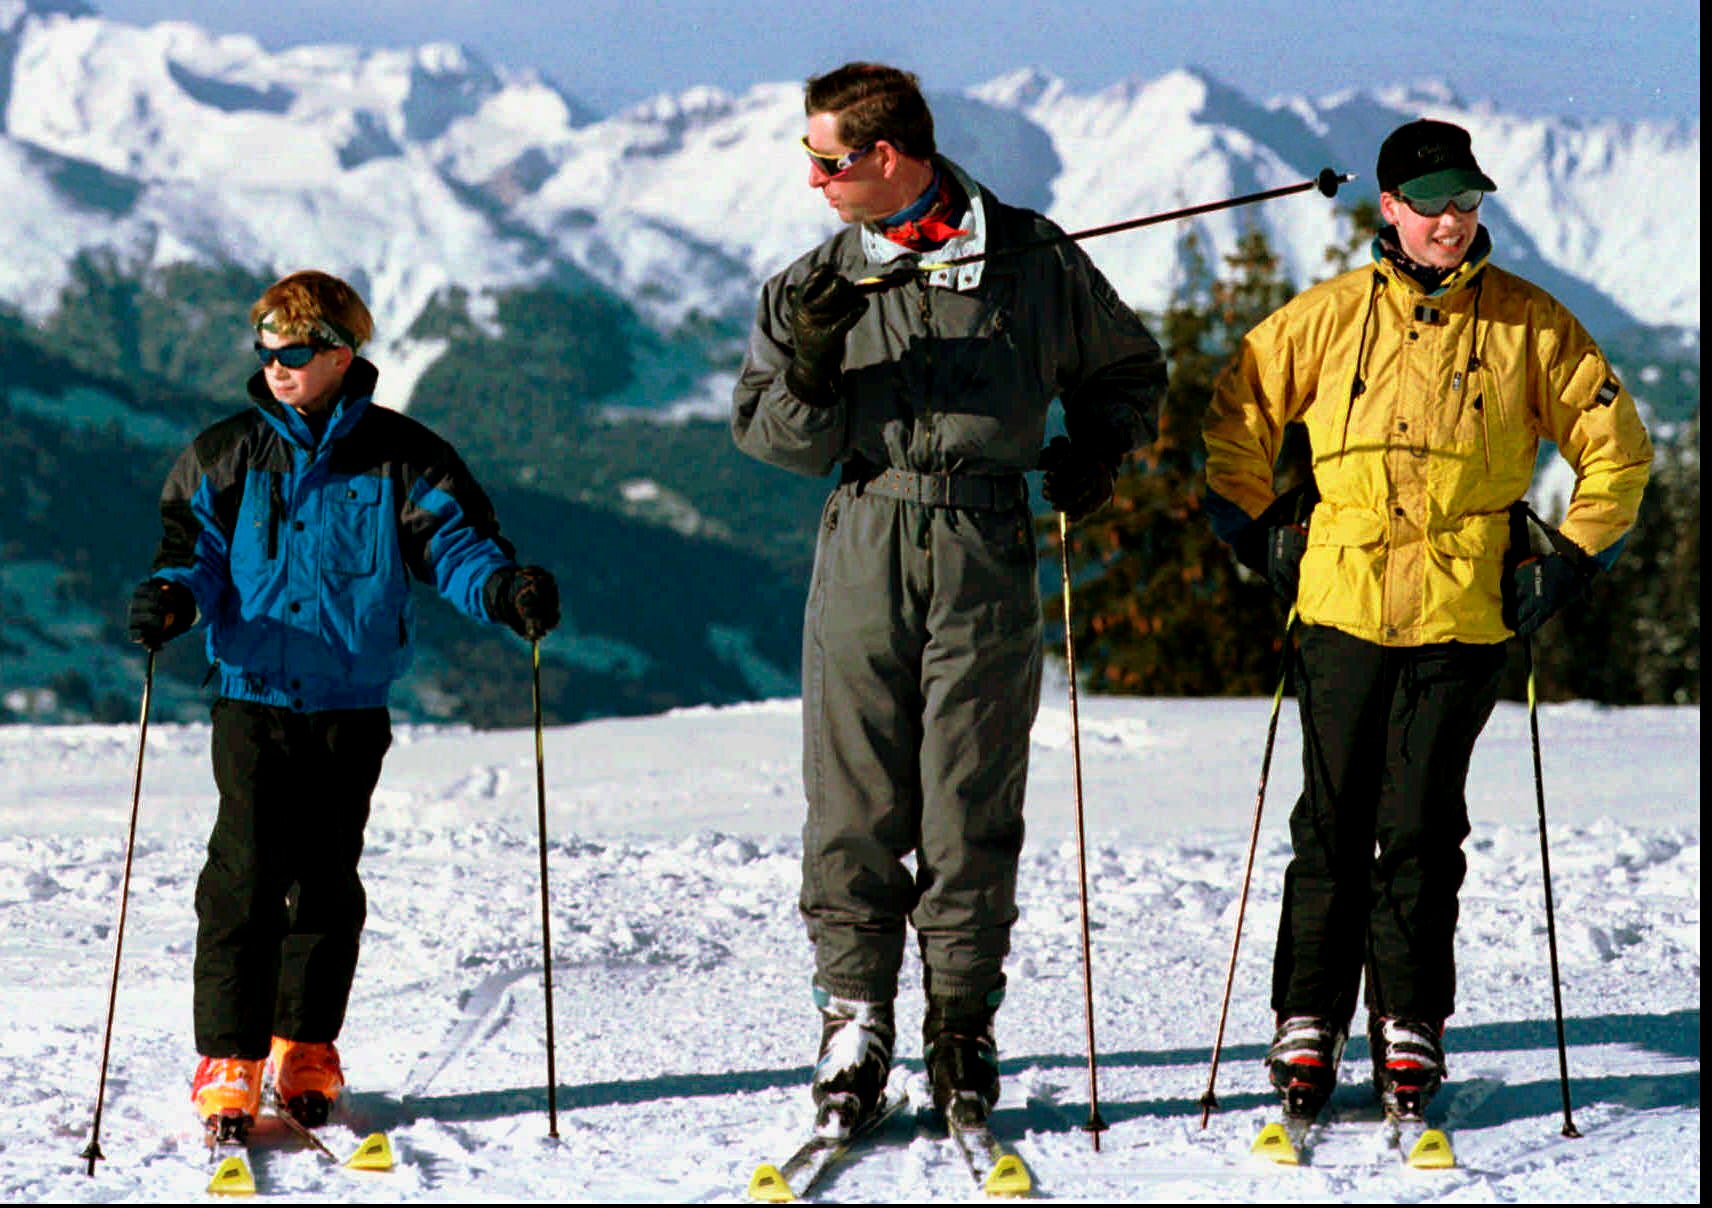 King Charles skiing with his sons, Prince William and Prince Harry.